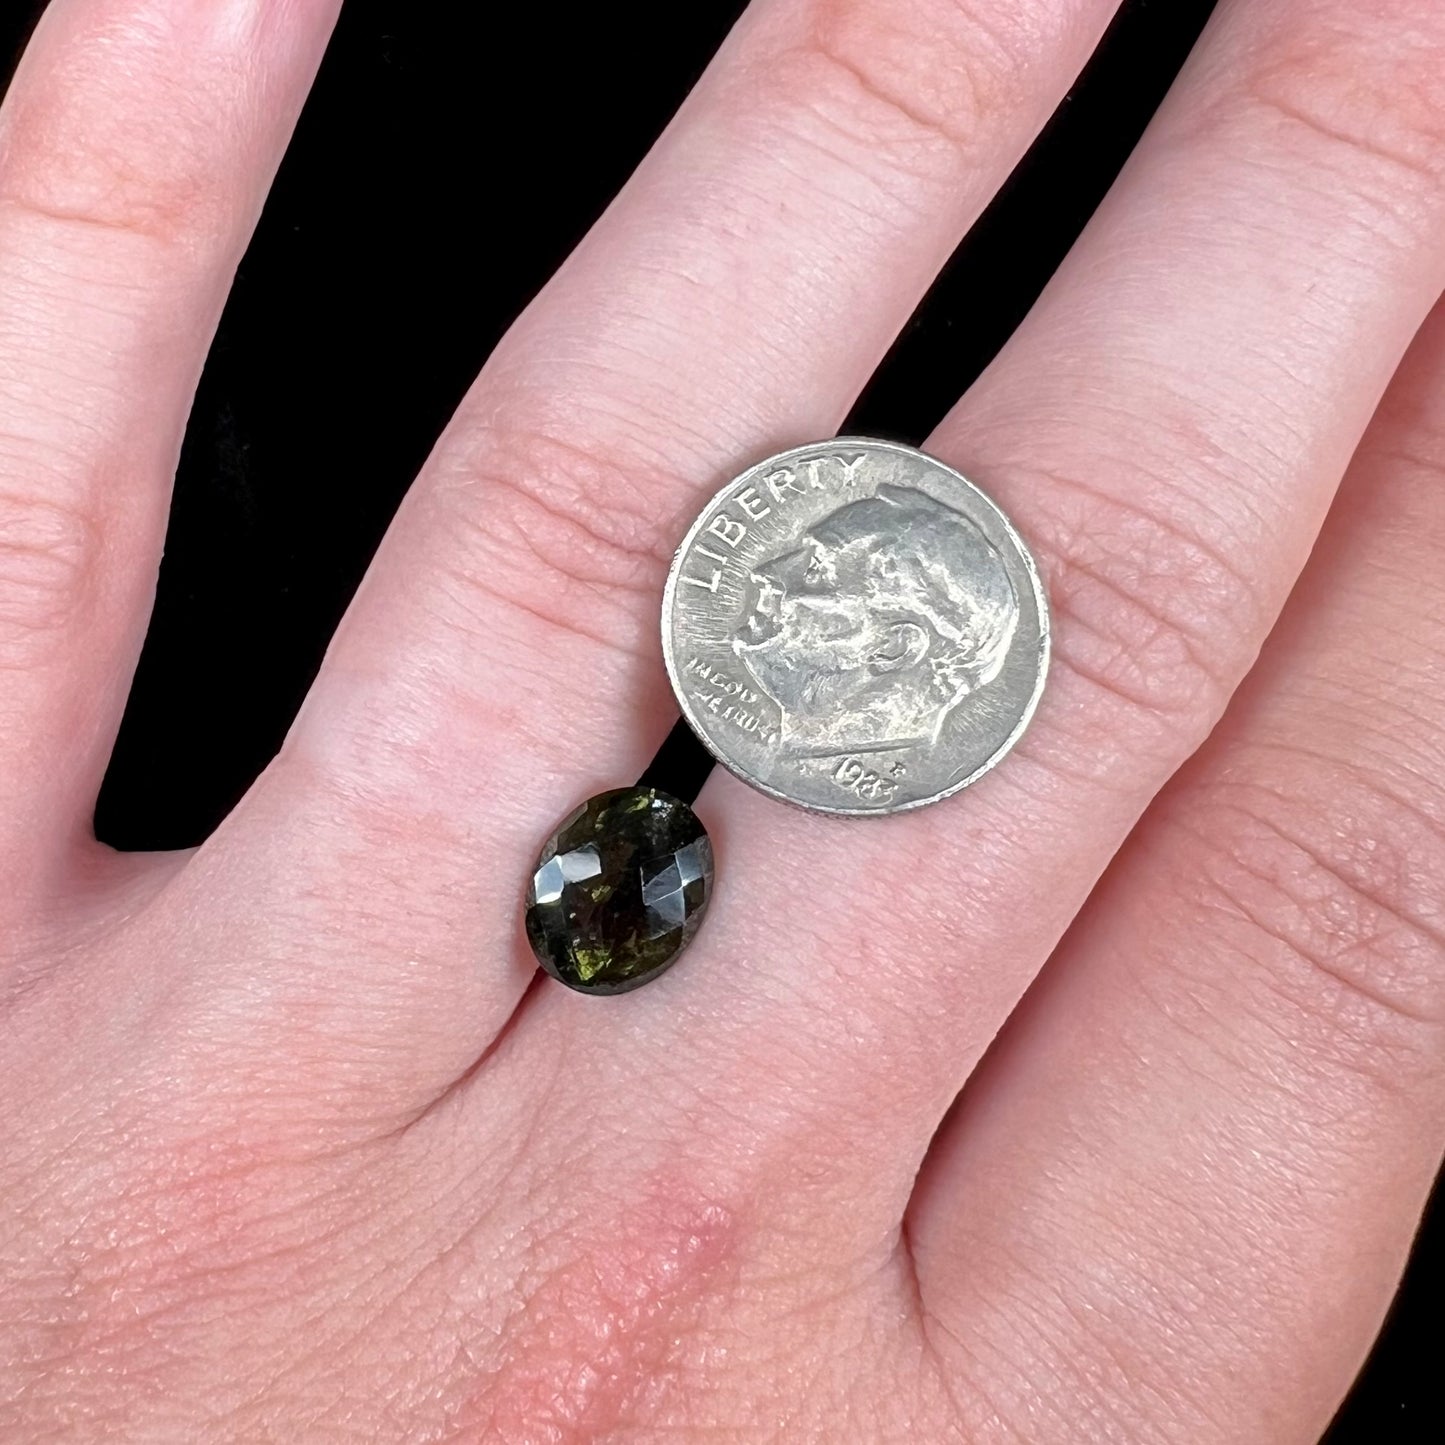 A loose, faceted oval checkerboard moldavite gemstone from the Czech Republic.